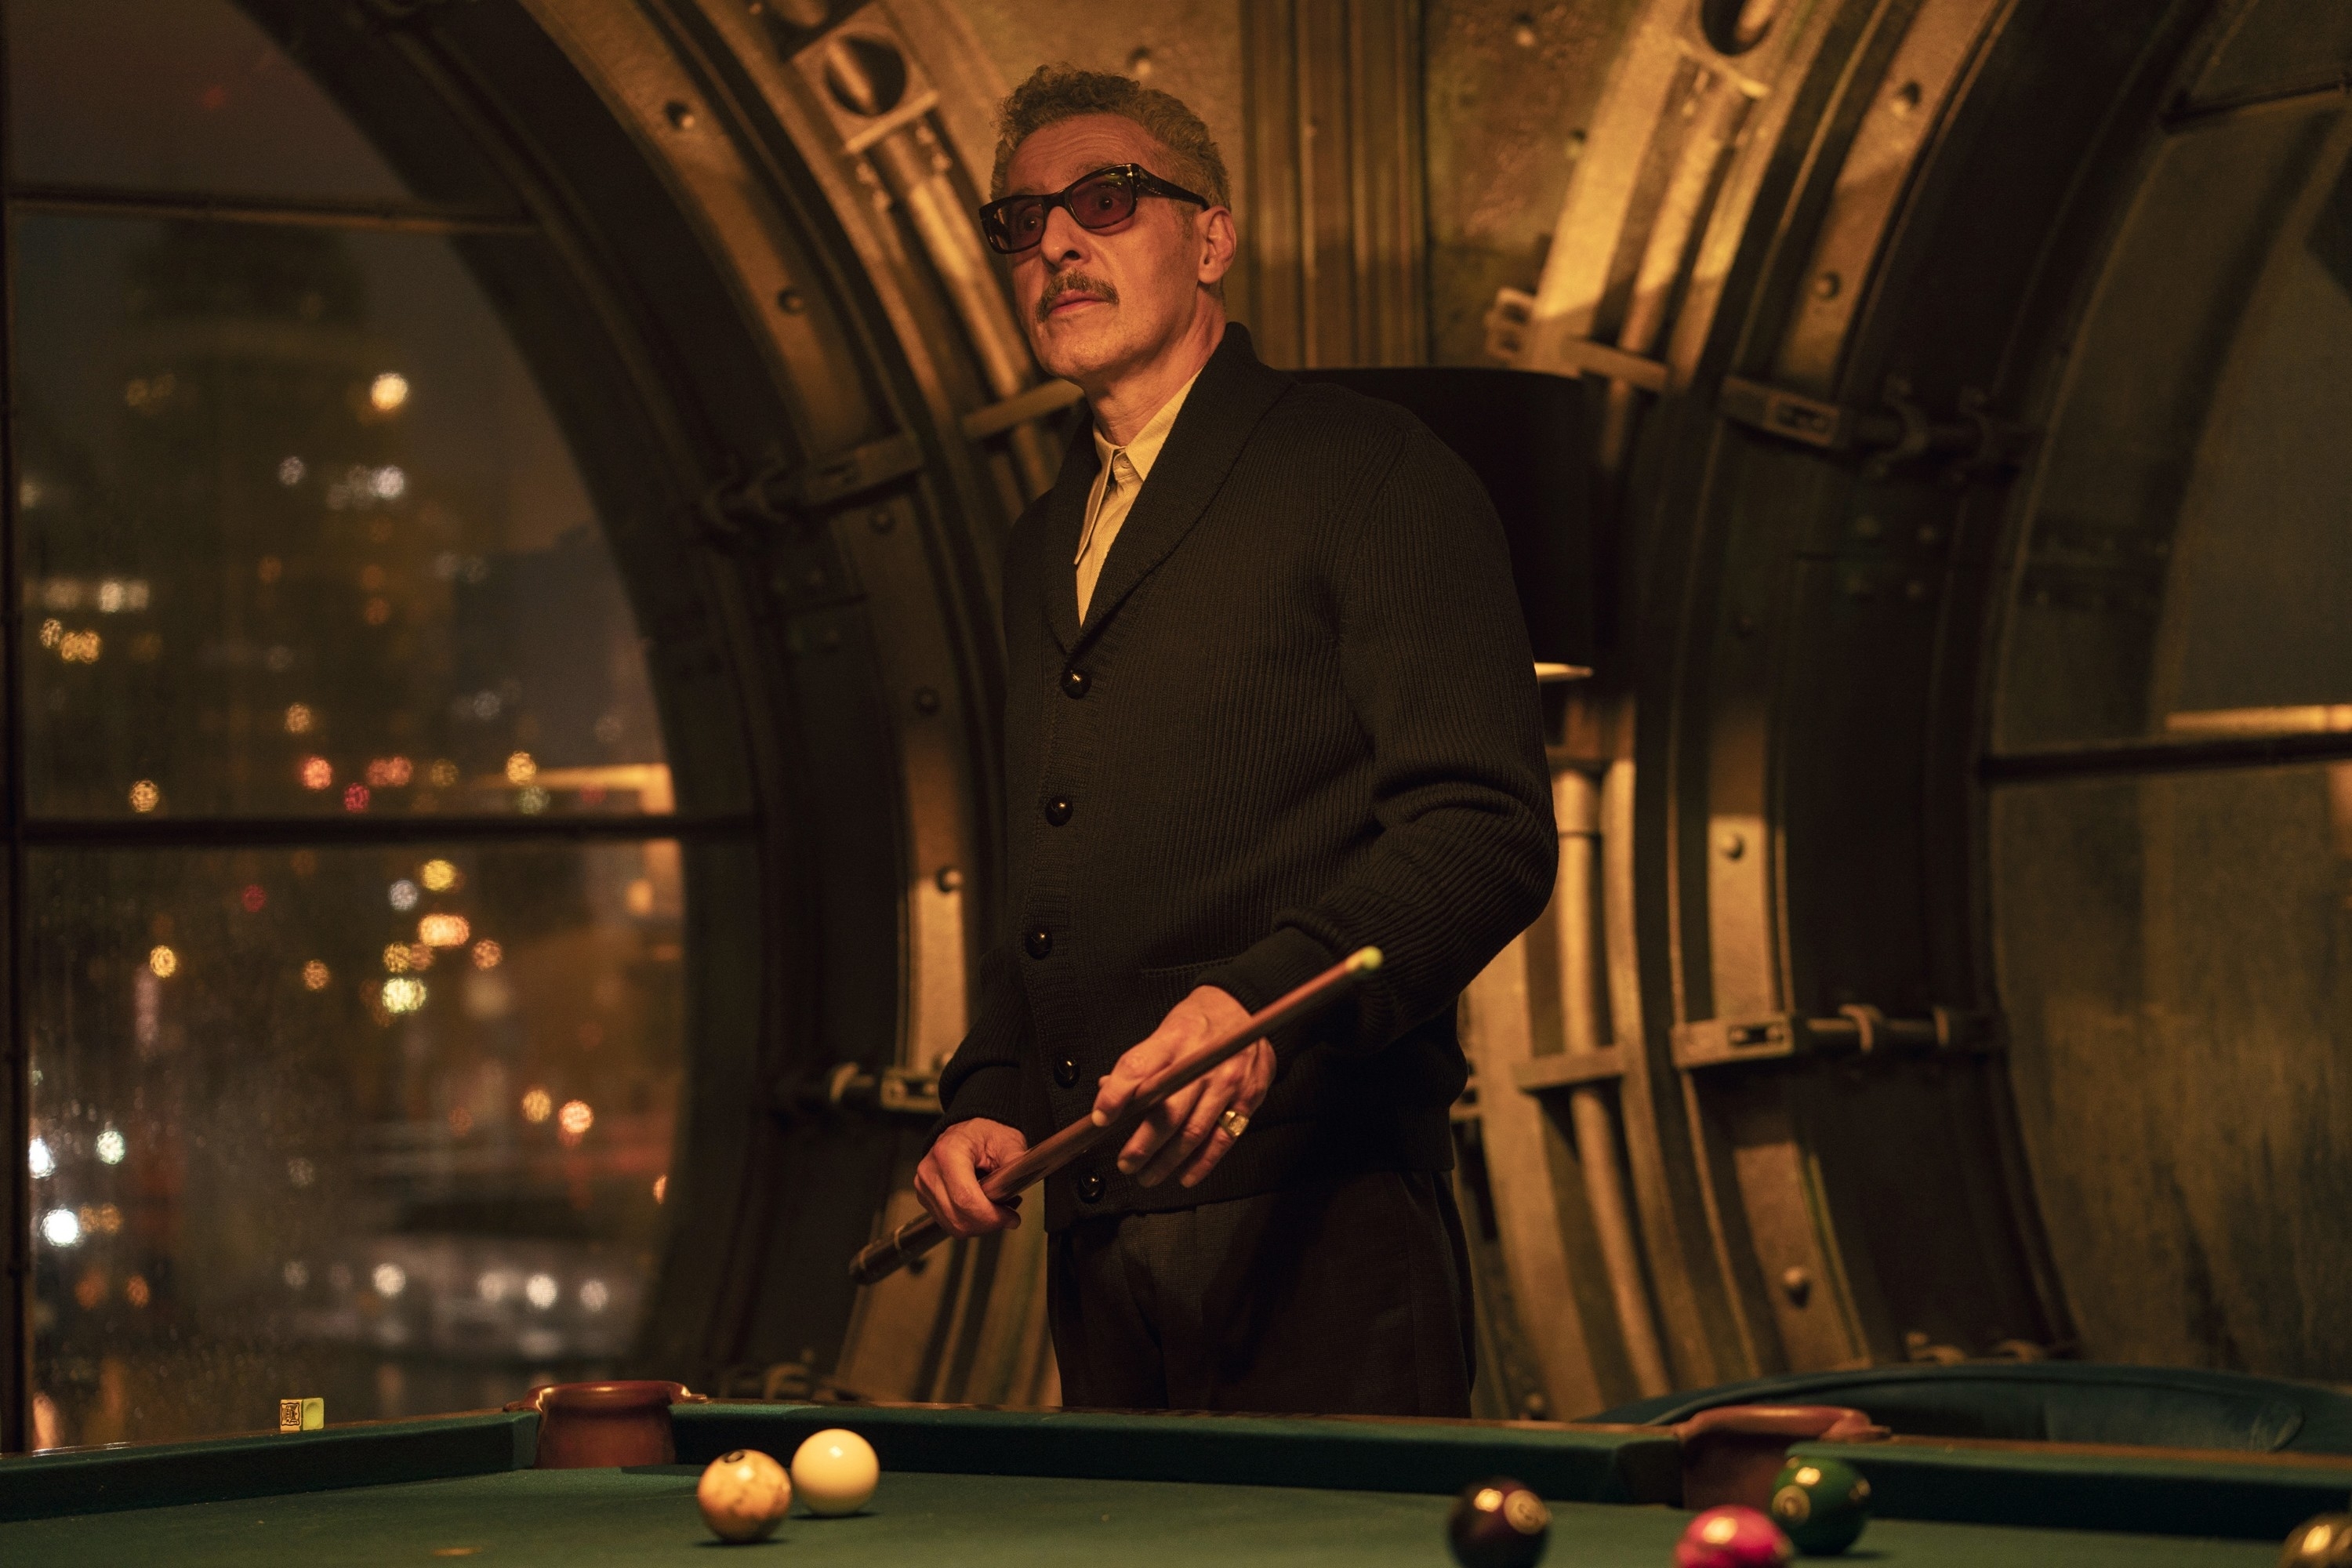 Carmine standing by a pool table in a dimly lit room with a cityscape visible through the round window behind